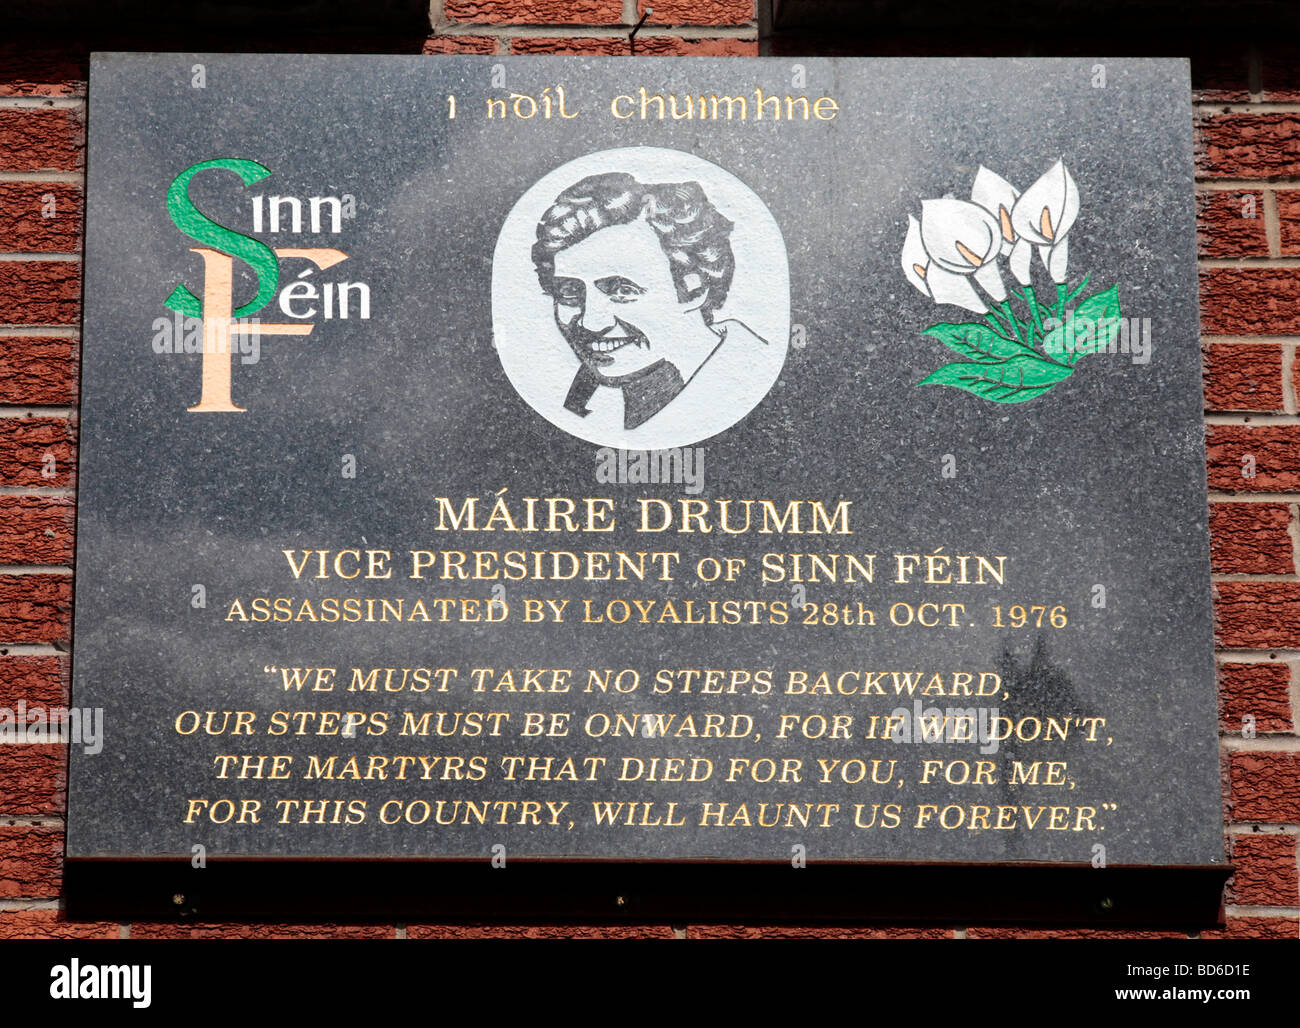 Plaque commemorating Maire Drumm, the Vice President of Sinn Fein, who was 'Assassinated by Loyalists on the 28th October 1976' Stock Photo